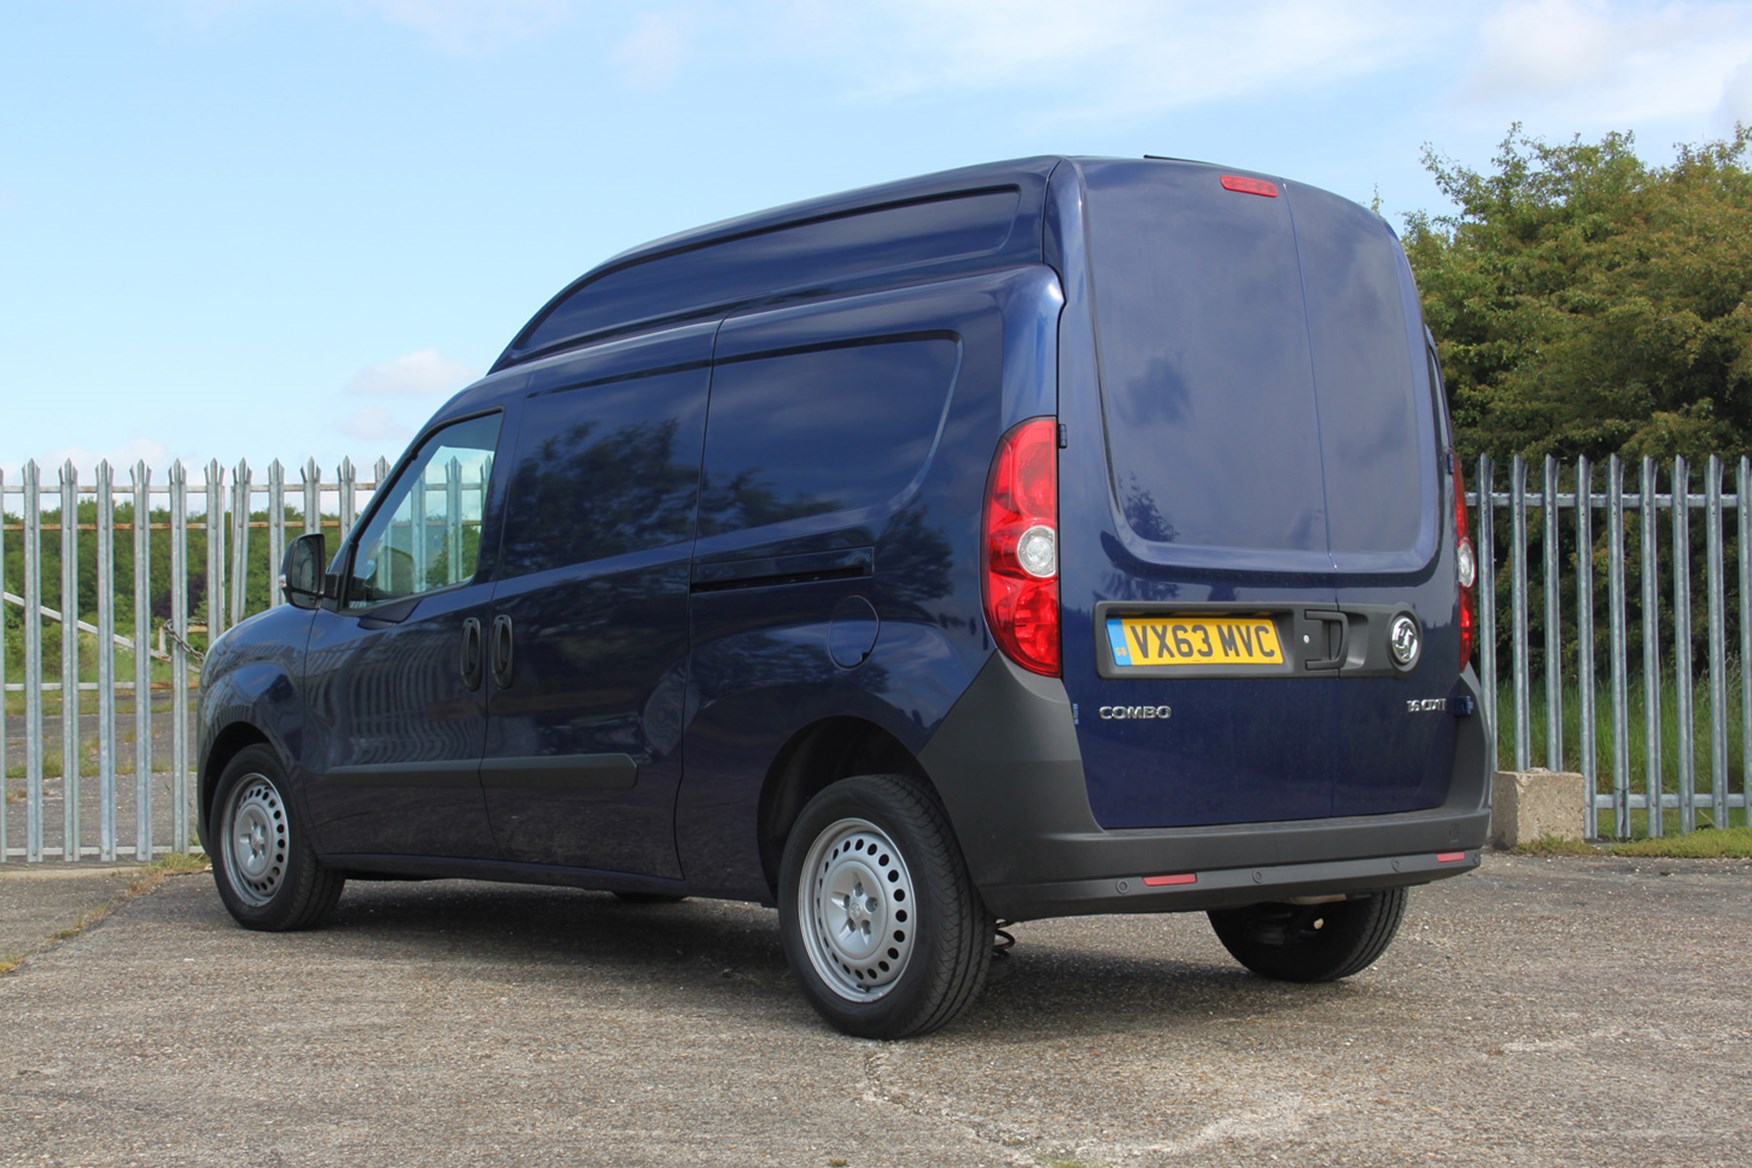 Vauxhall Combo full review on Parkers Vans - rear exterior